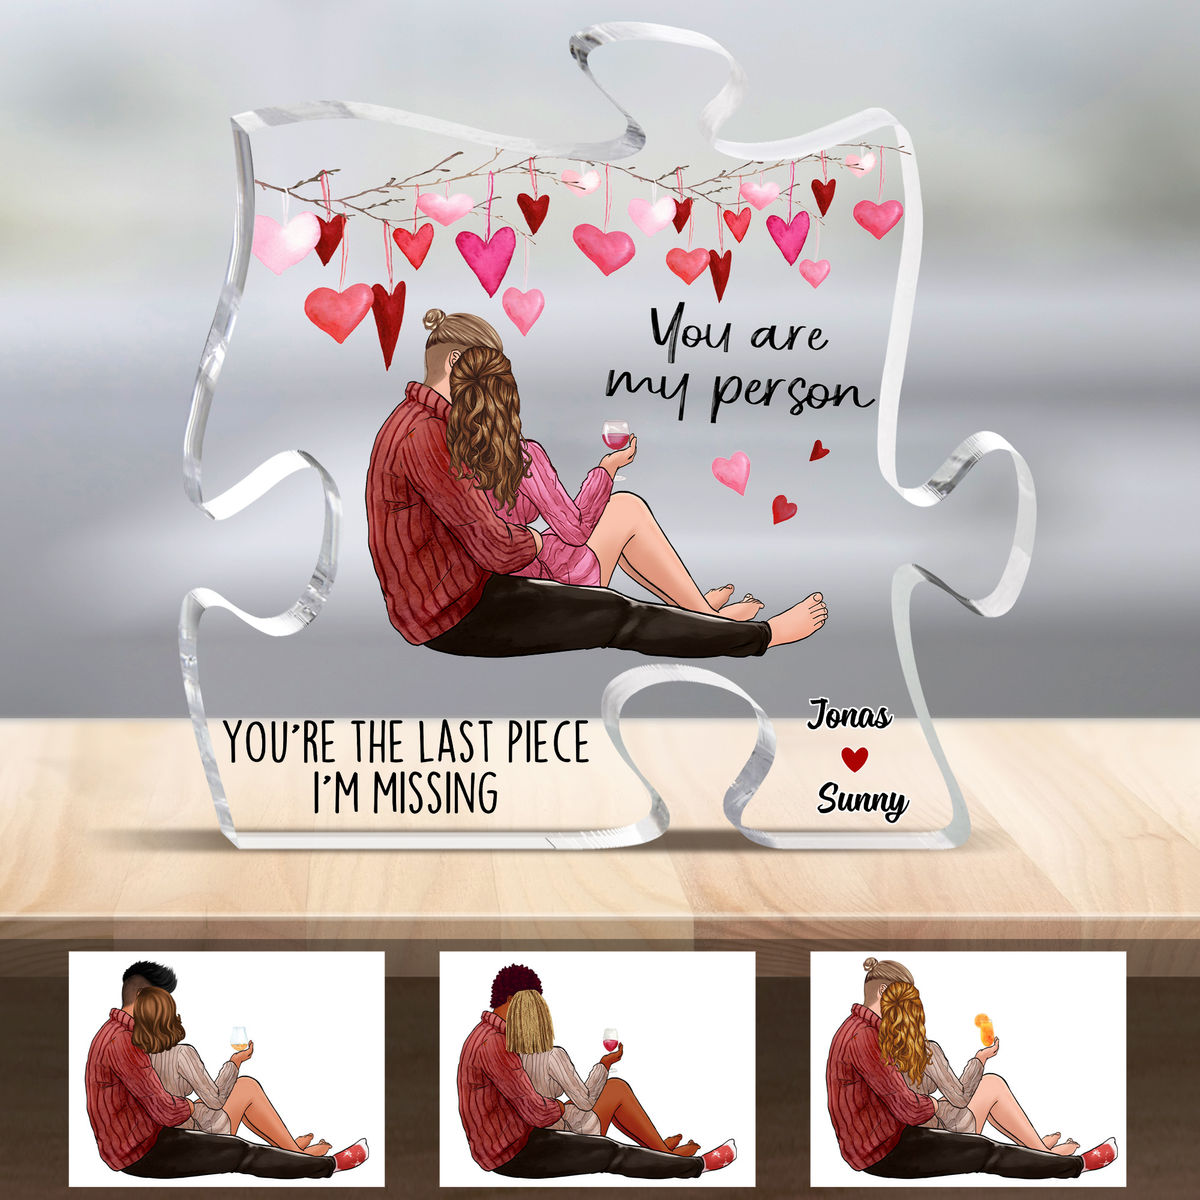 Personalized Desktop - Puzzle Acrylic Plaque - You are my person (22591) - Wedding Gifts , Anniversary Gifts, Valentine Gifts, Gifts For Couples